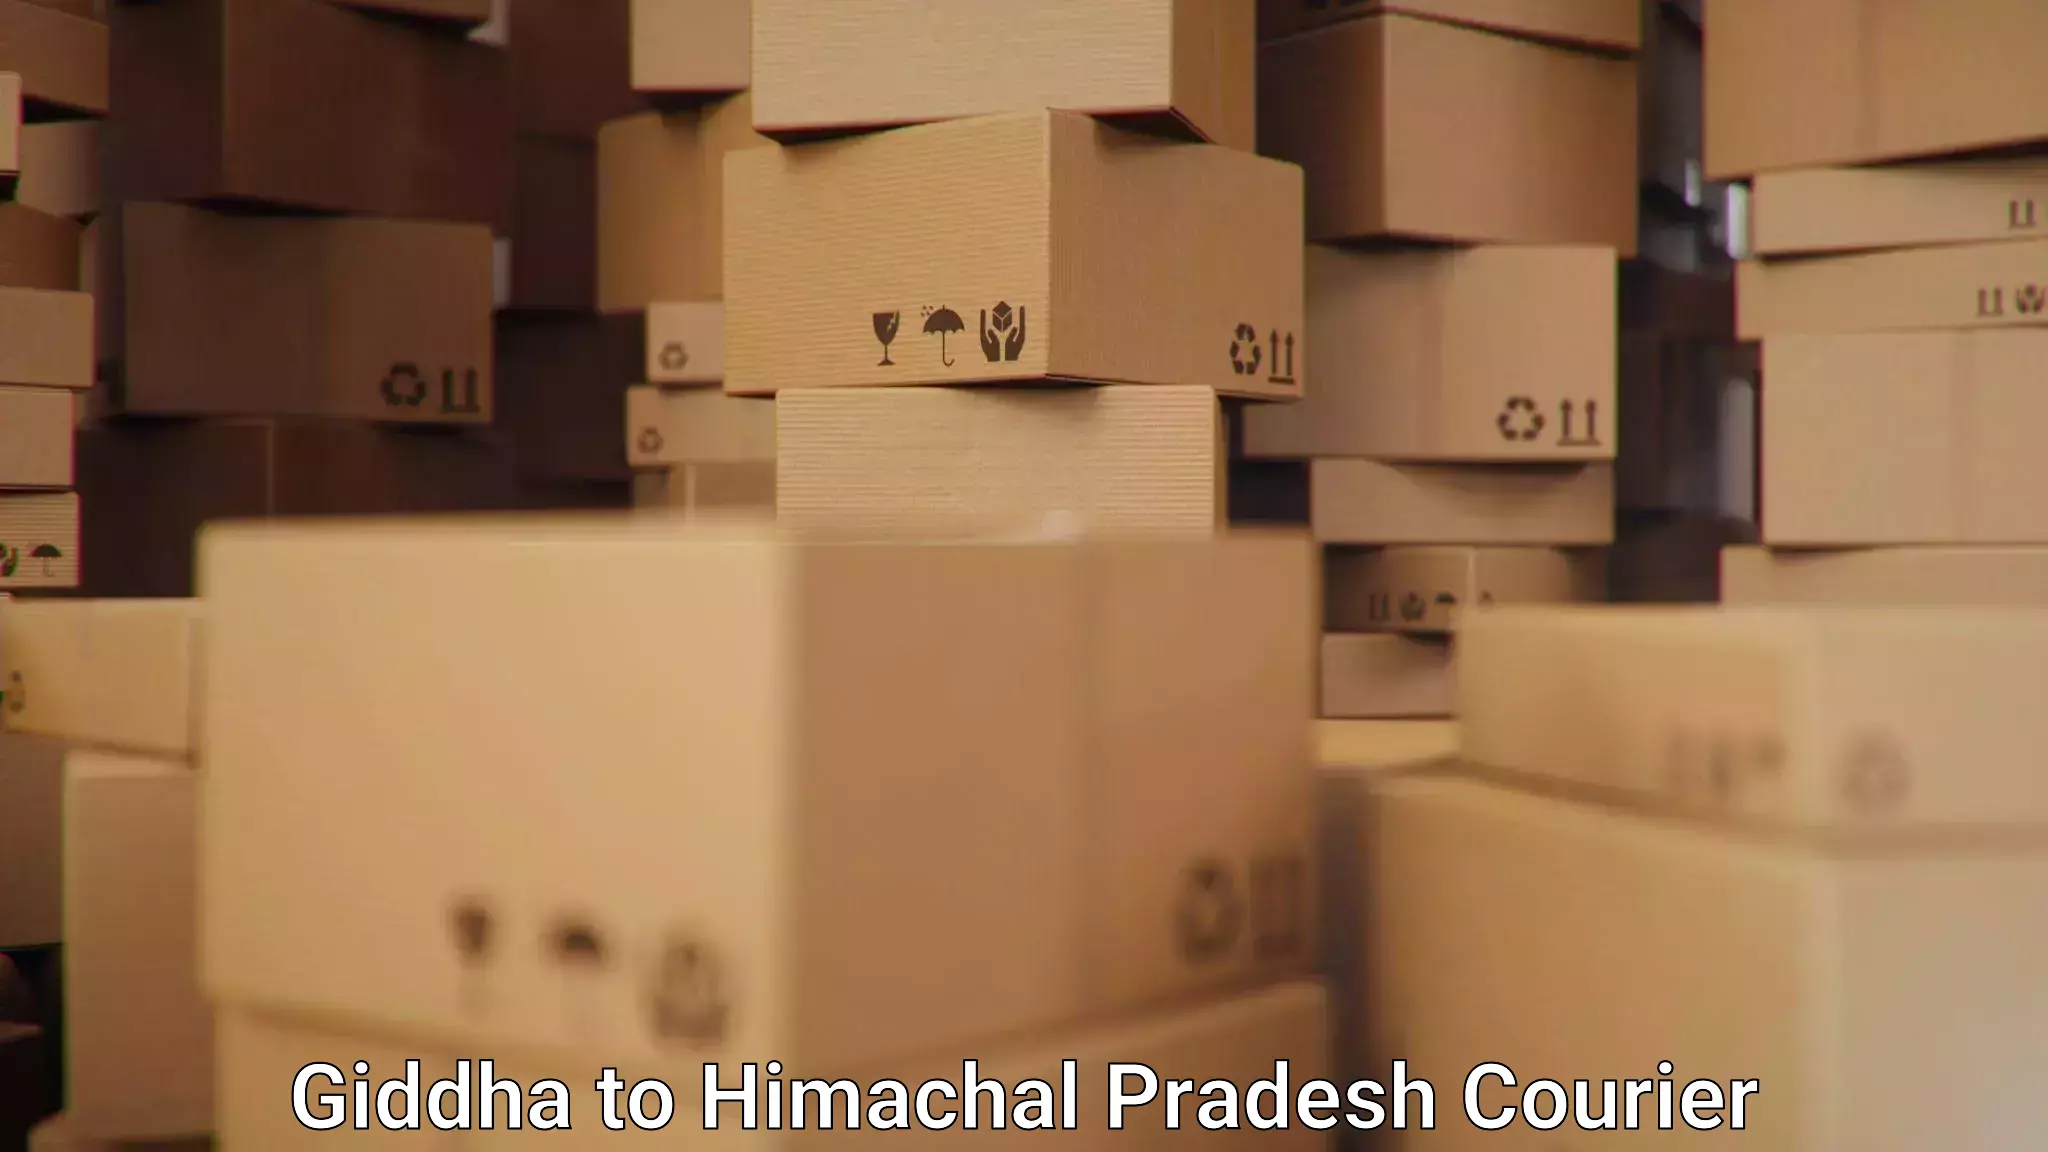 End-to-end delivery Giddha to Himachal Pradesh